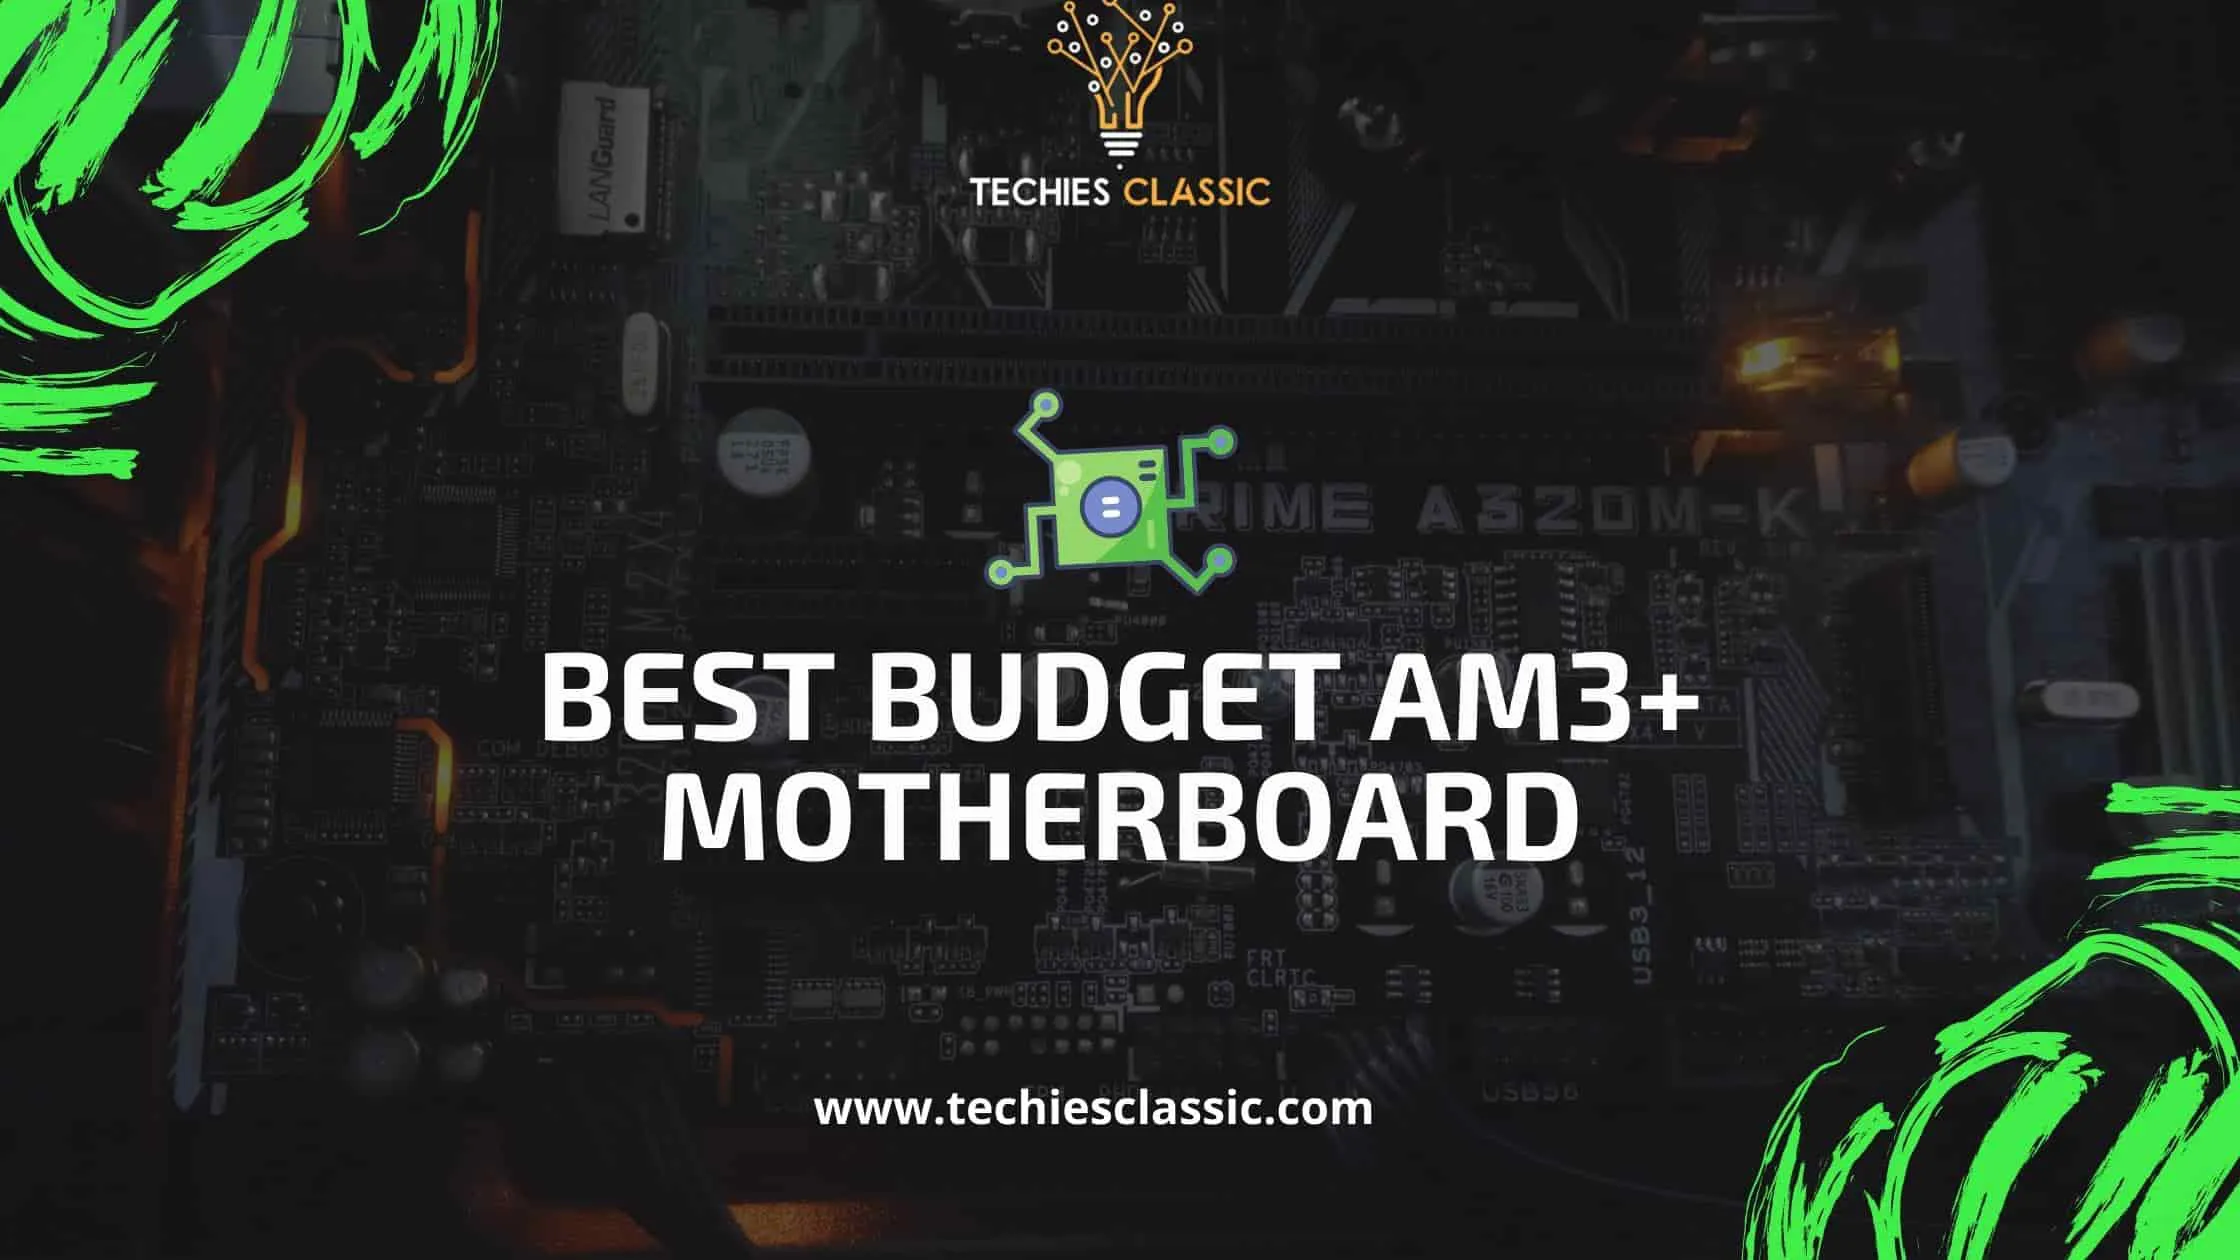 The 10 Best Budget AM3+ Motherboard to buy in 2023